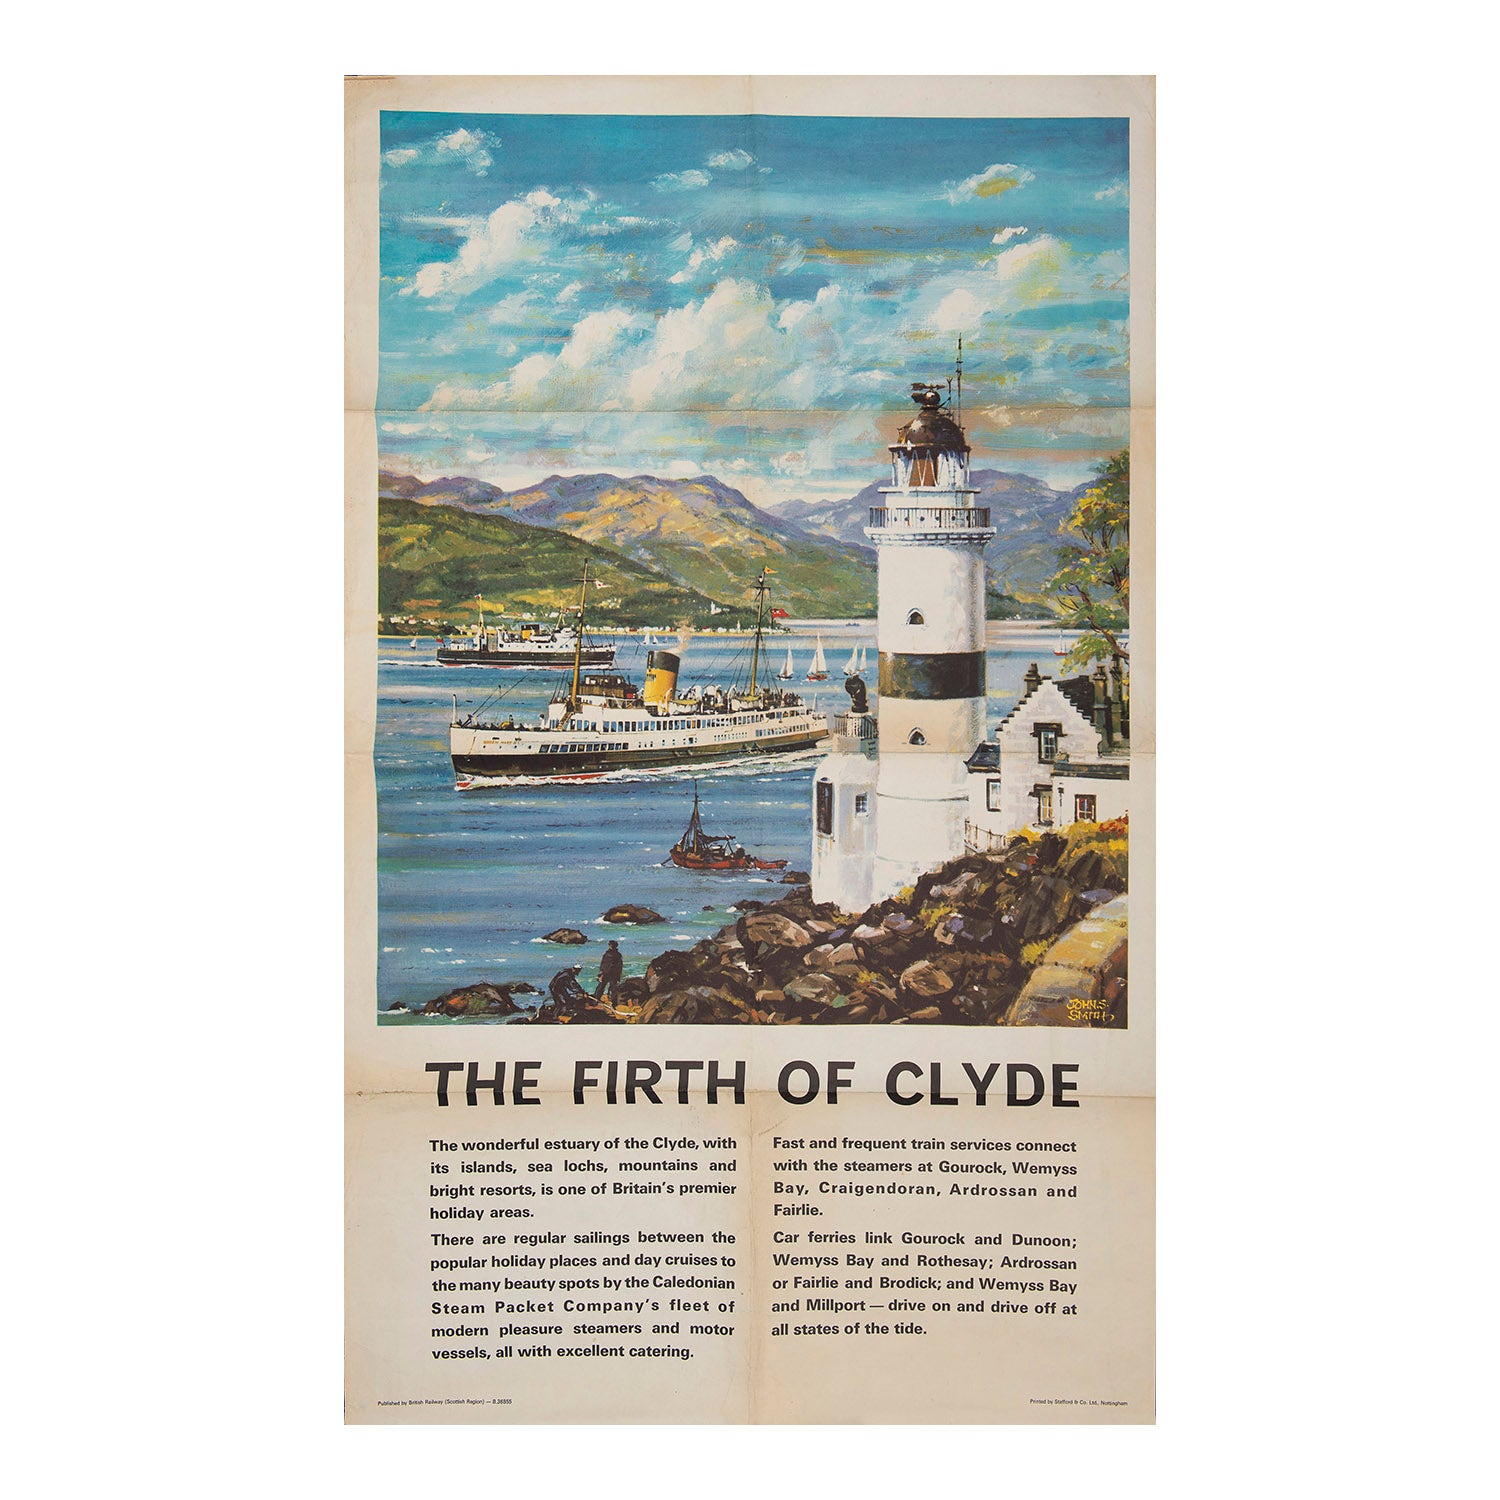 British Railways (Scottish Region) poster, <em>The Firth of Clyde</em>, painted by John S Smith, c.1960. The design depicts the Cloch lighthouse at Gourock in the foreground, with a Caledonian Steam Packet Company pleasure steamer and other boats traversing the Clyde against a mountainous background. 